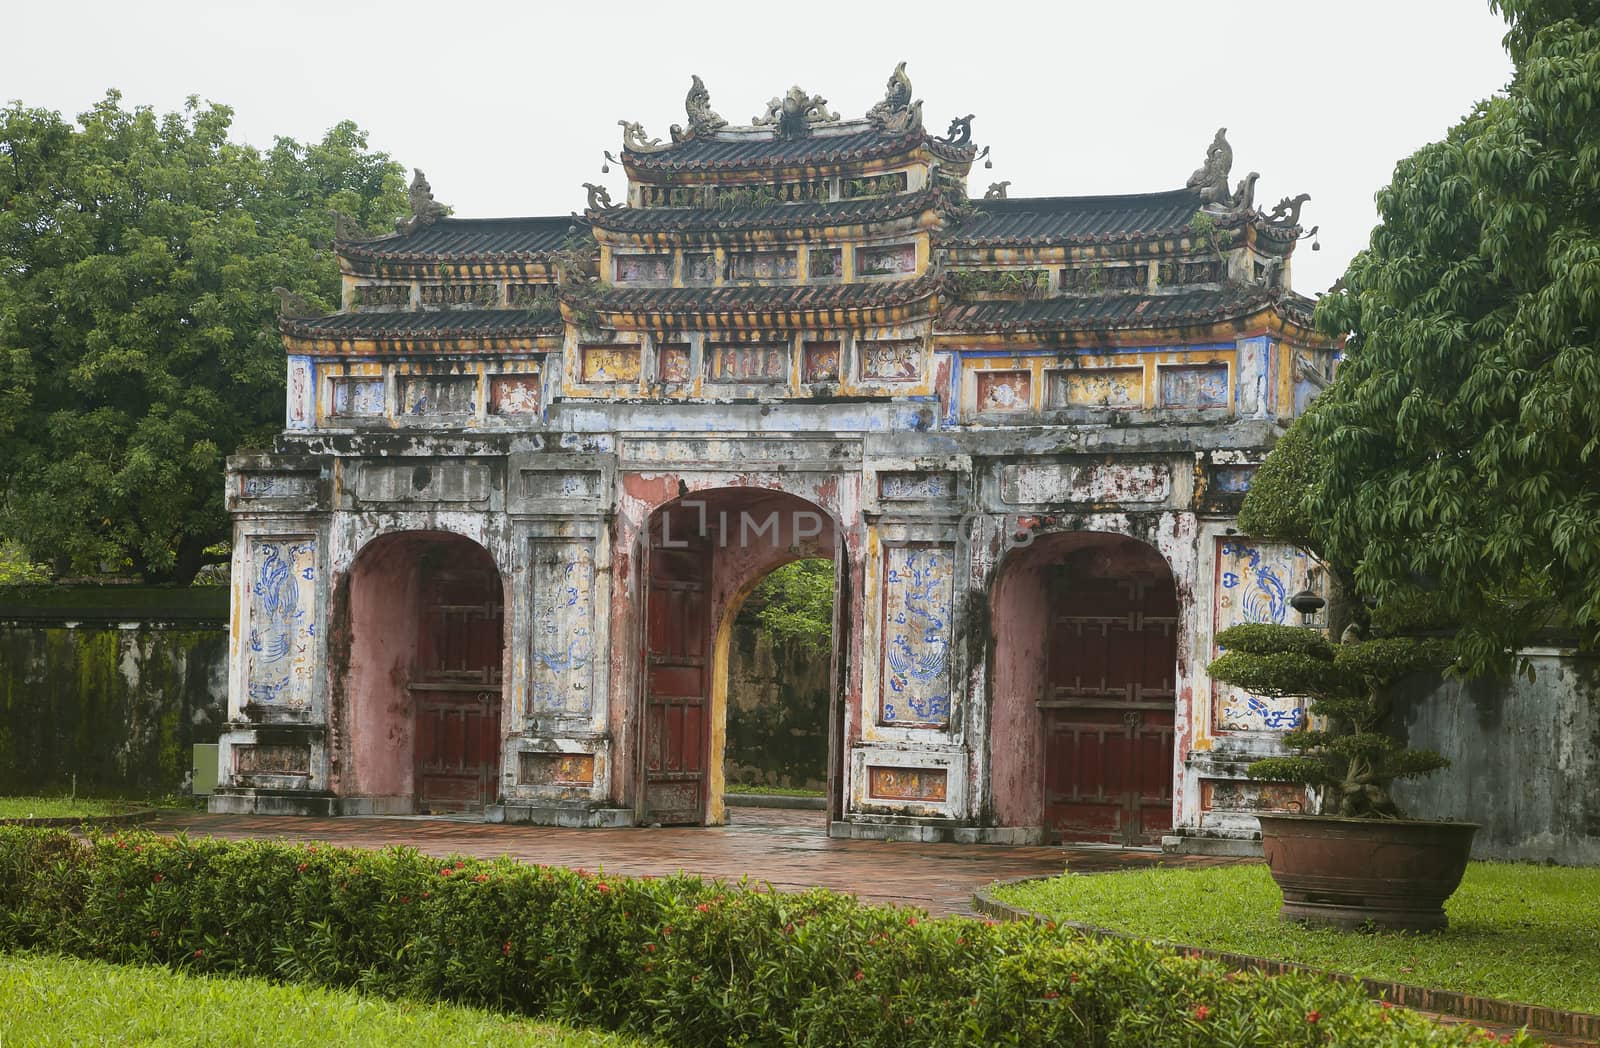 The Gate to the Citadel of the Imperial City in Hue, Vietnam by Goodday